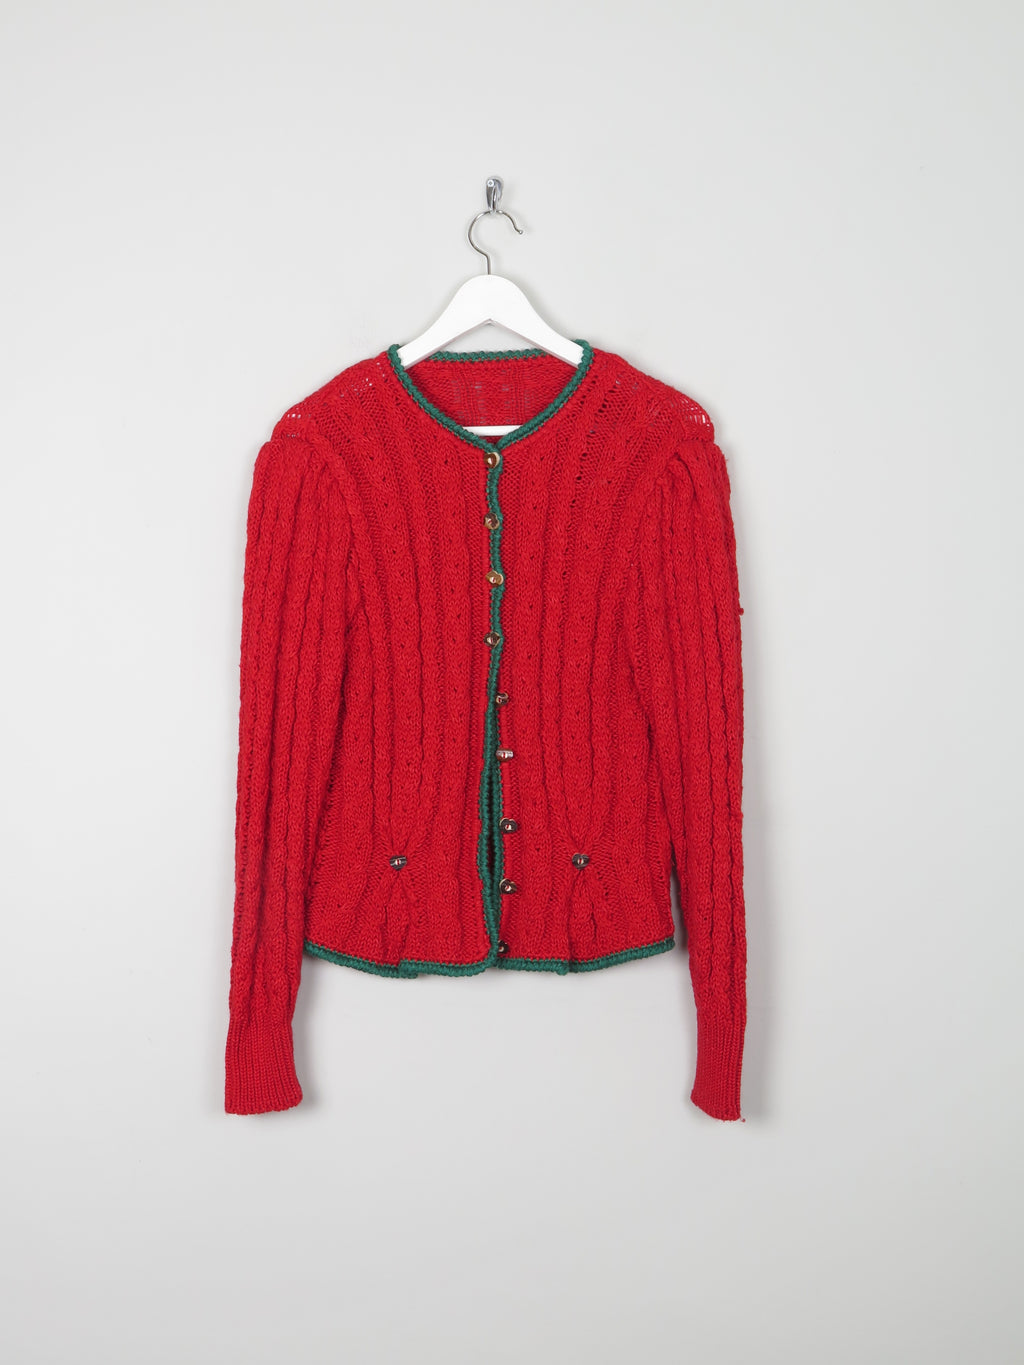 Women’s Red Vintage Austrian Fitted Cardigan 10/12